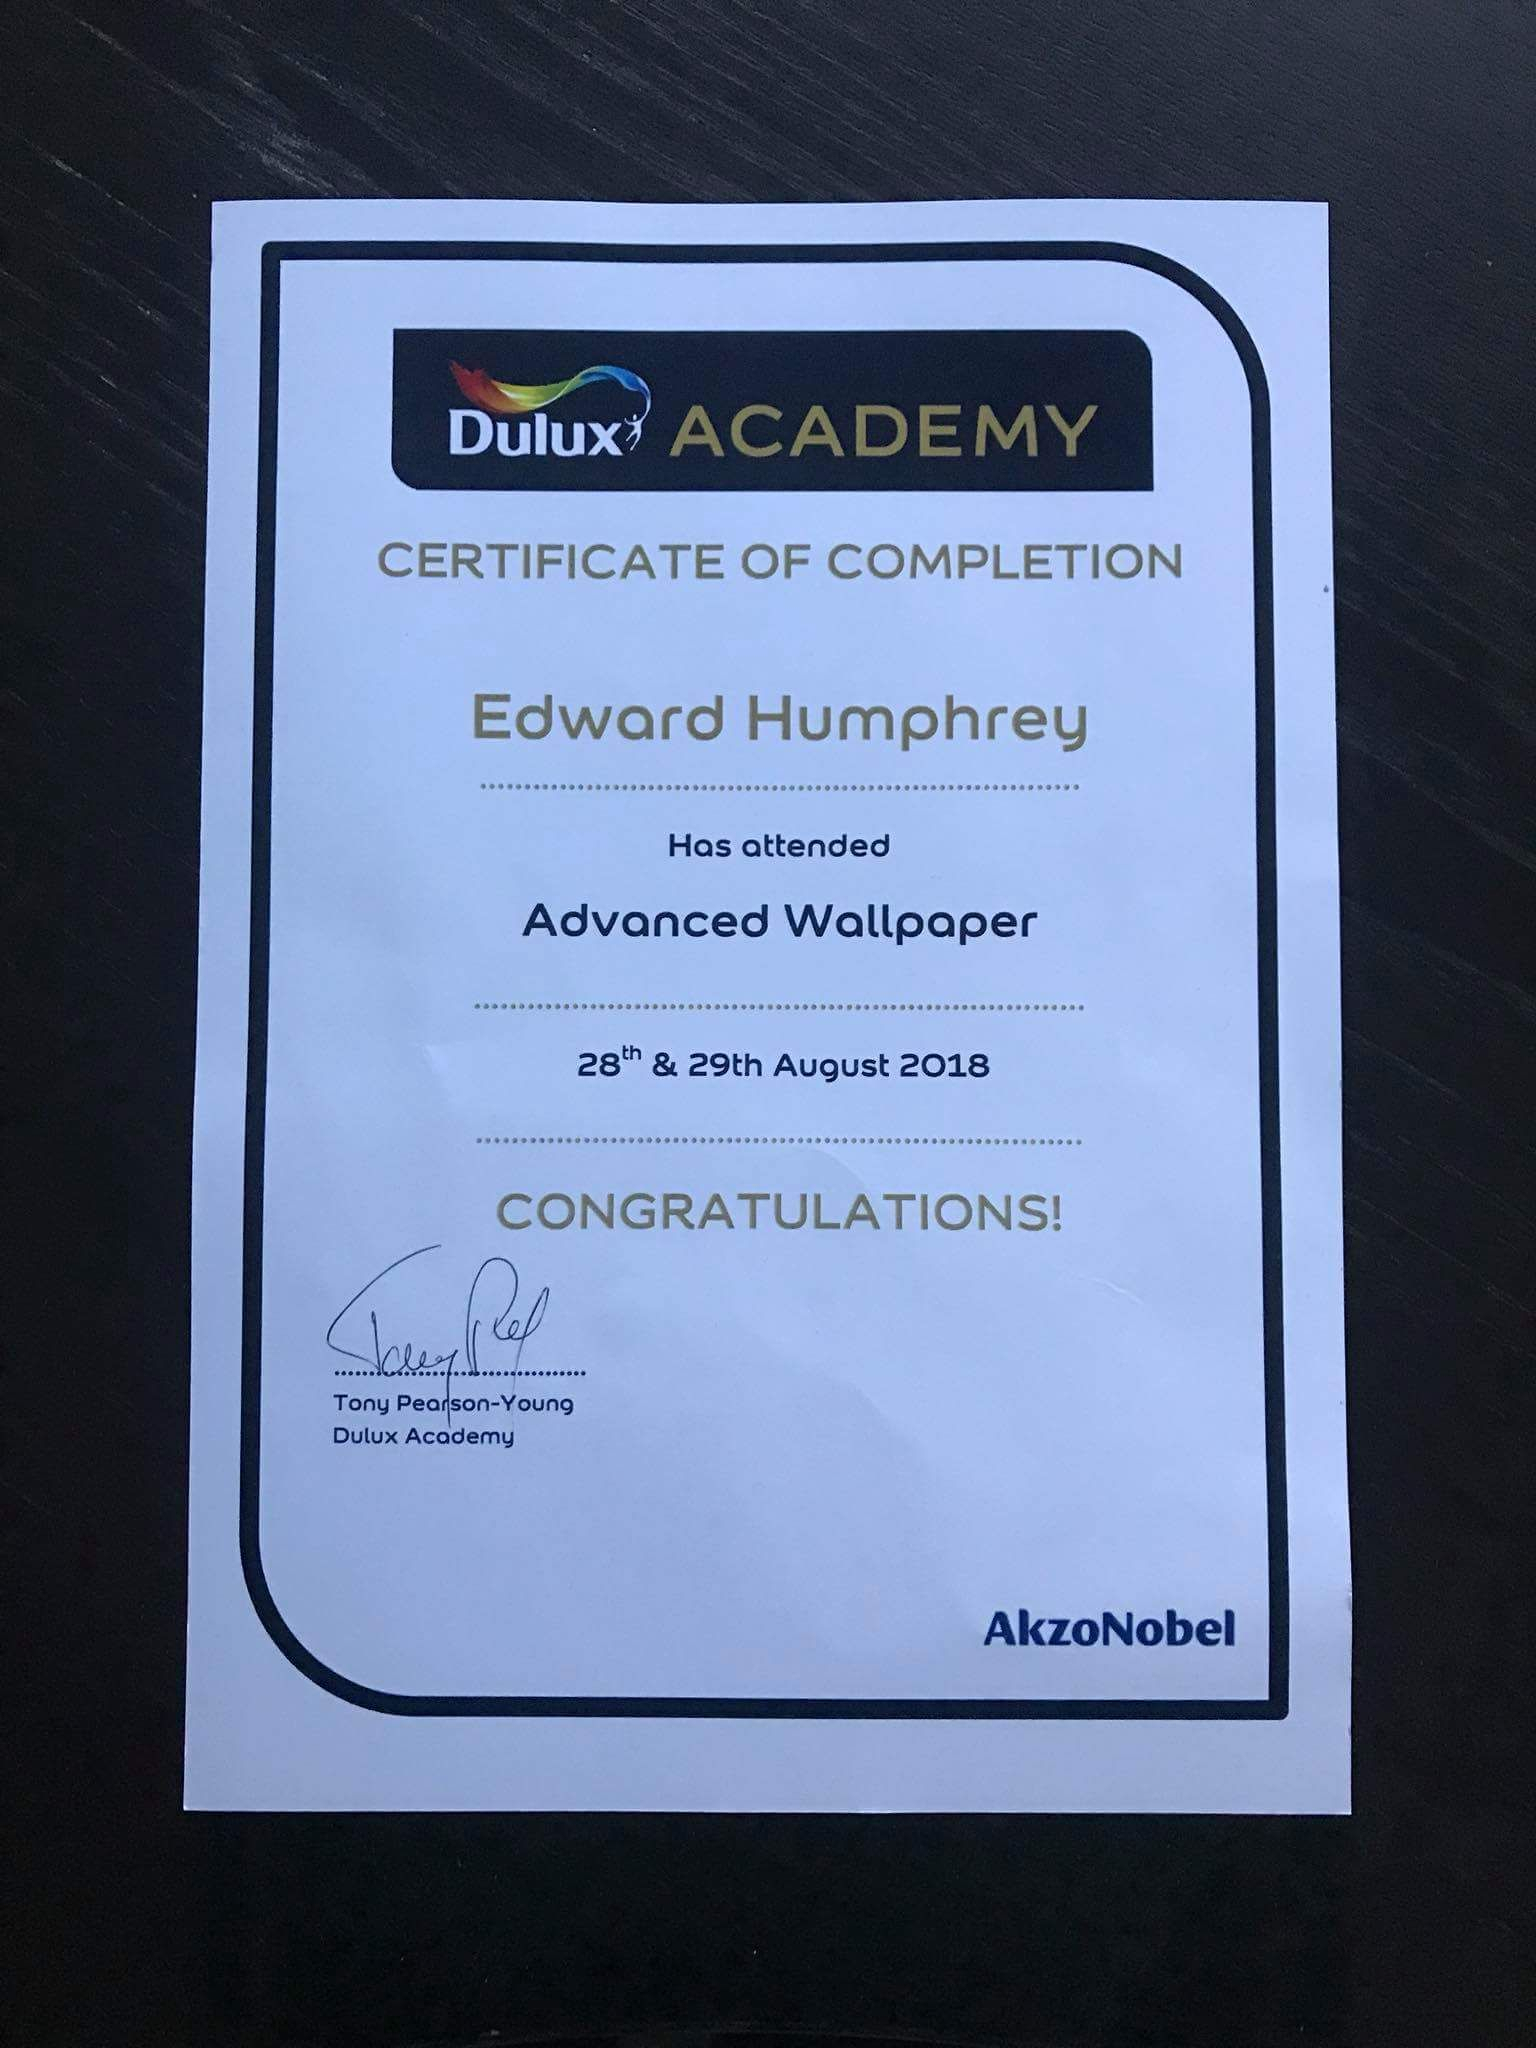 Image Result For Dulux Academy Certificates | Certificate Of In This Entitles The Bearer To Template Certificate